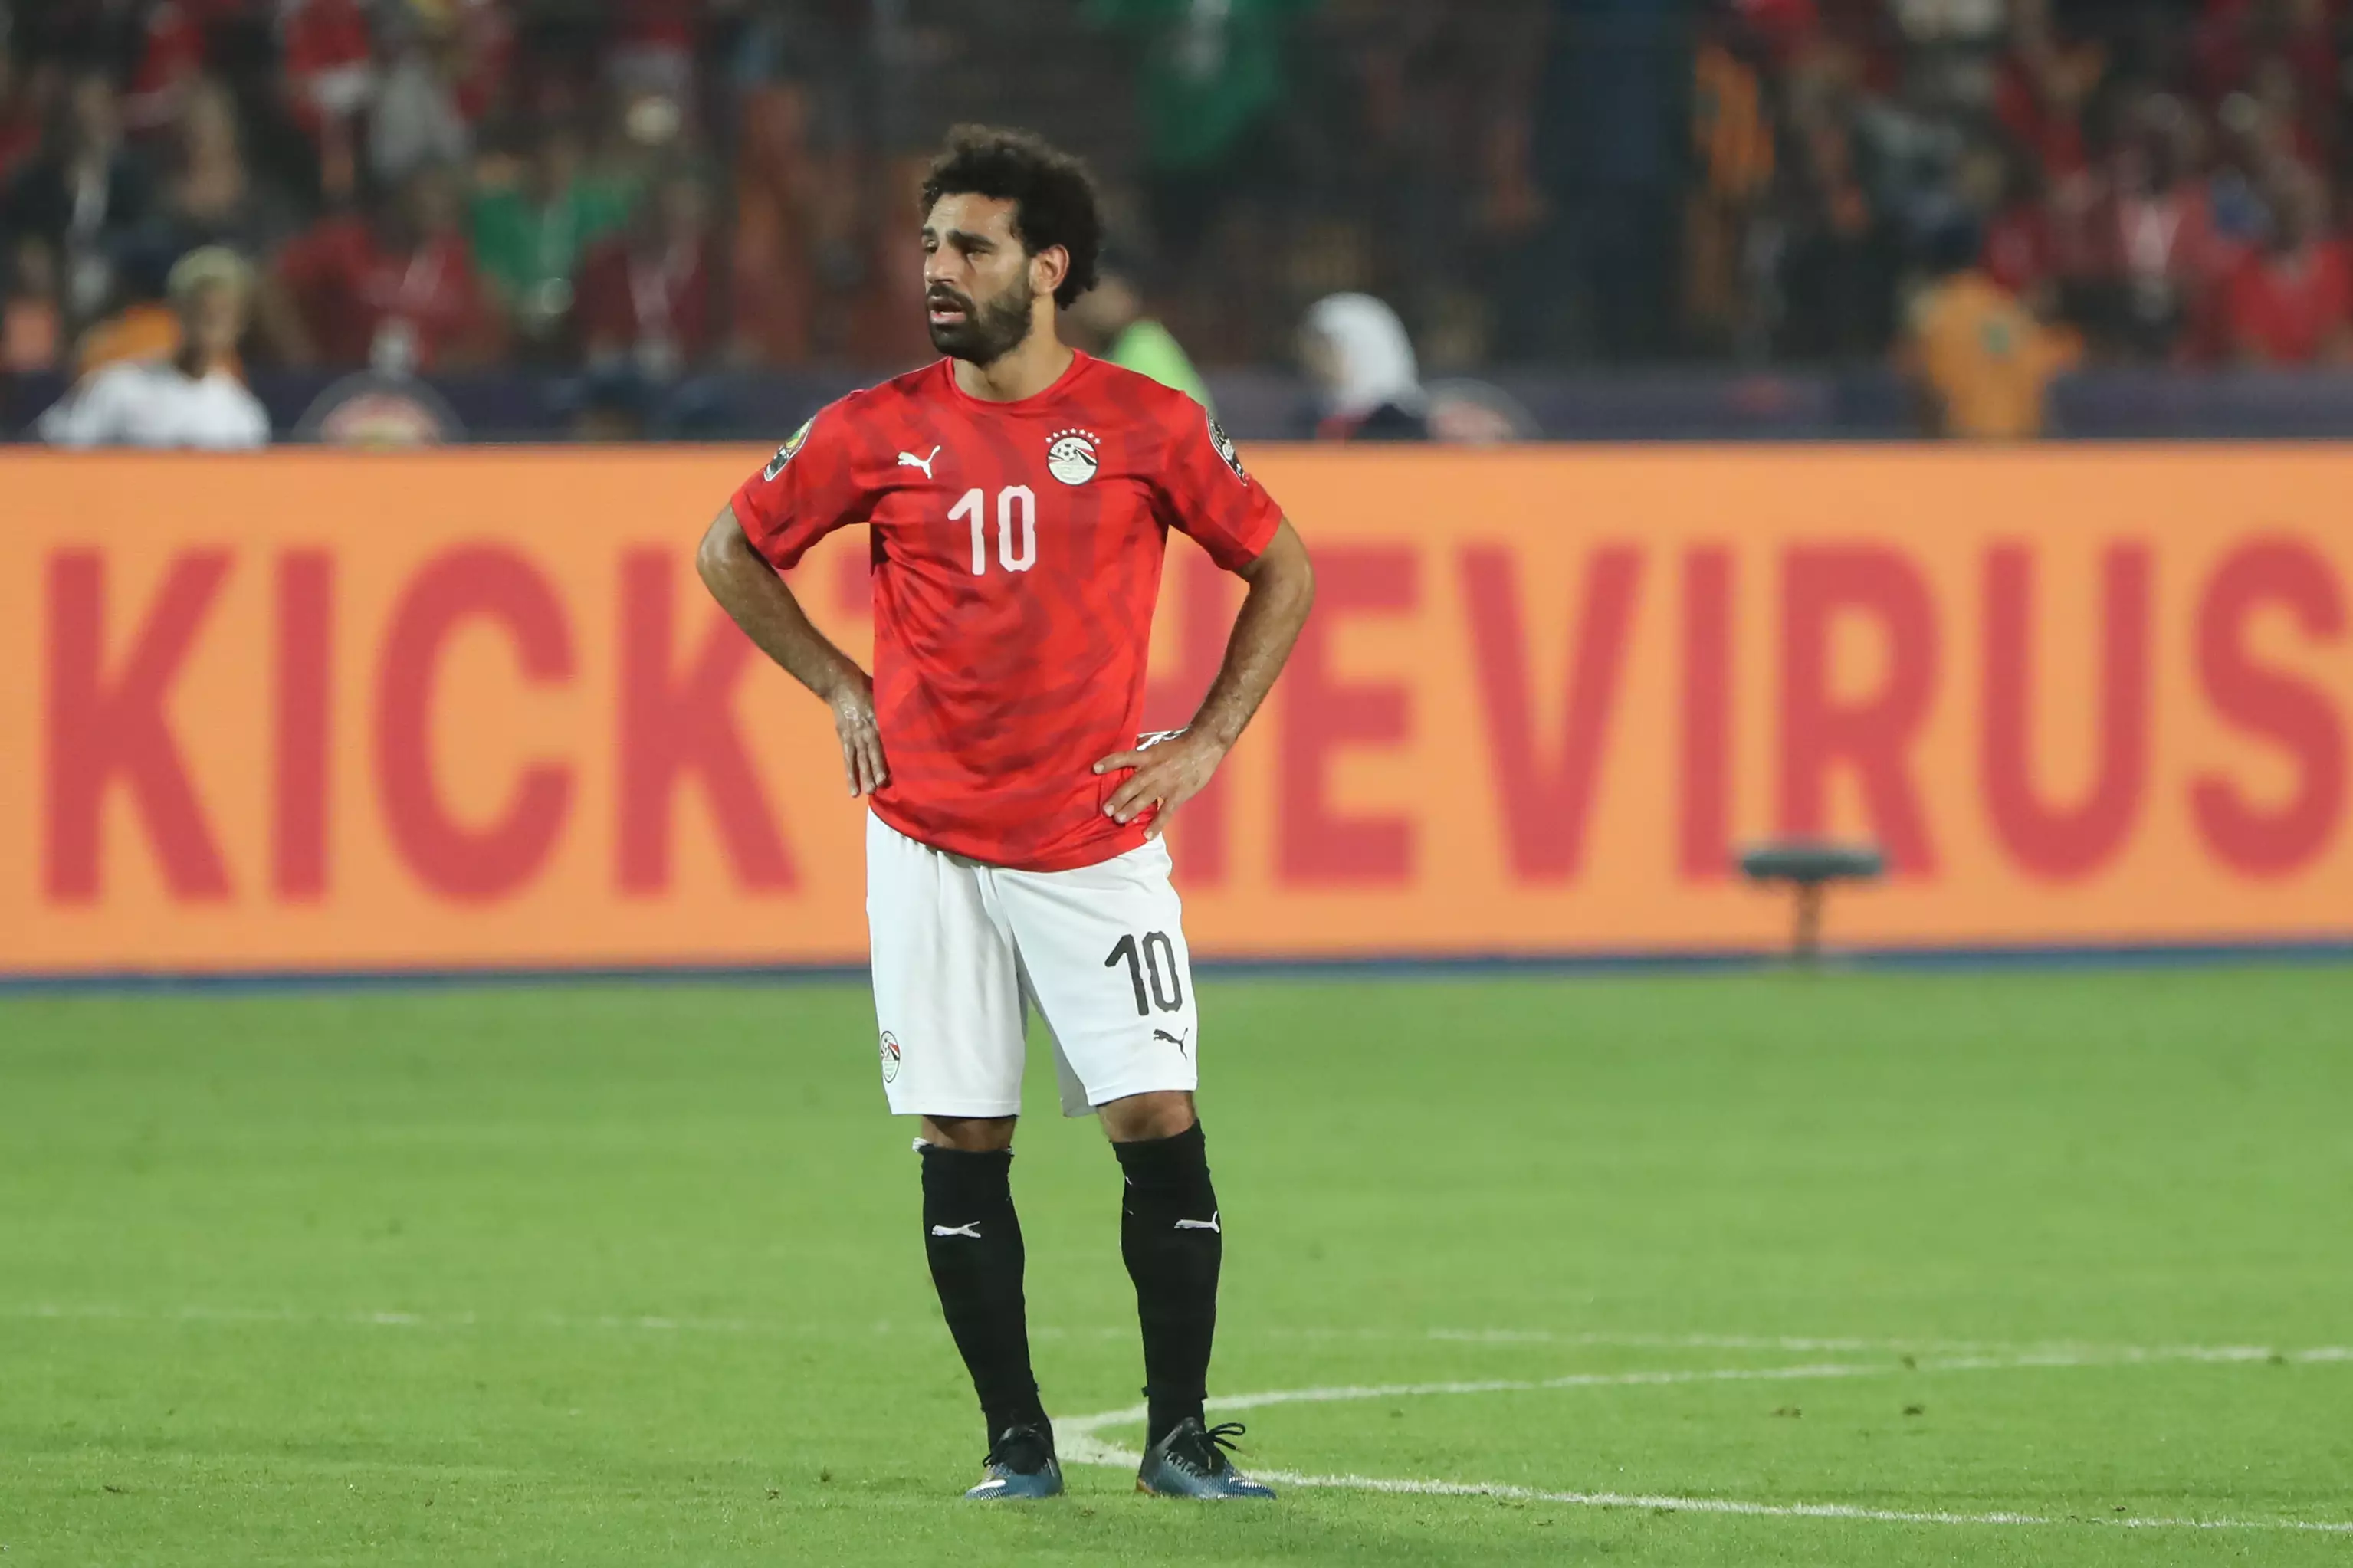 Salah playing for Egypt in 2019. Image: PA Images